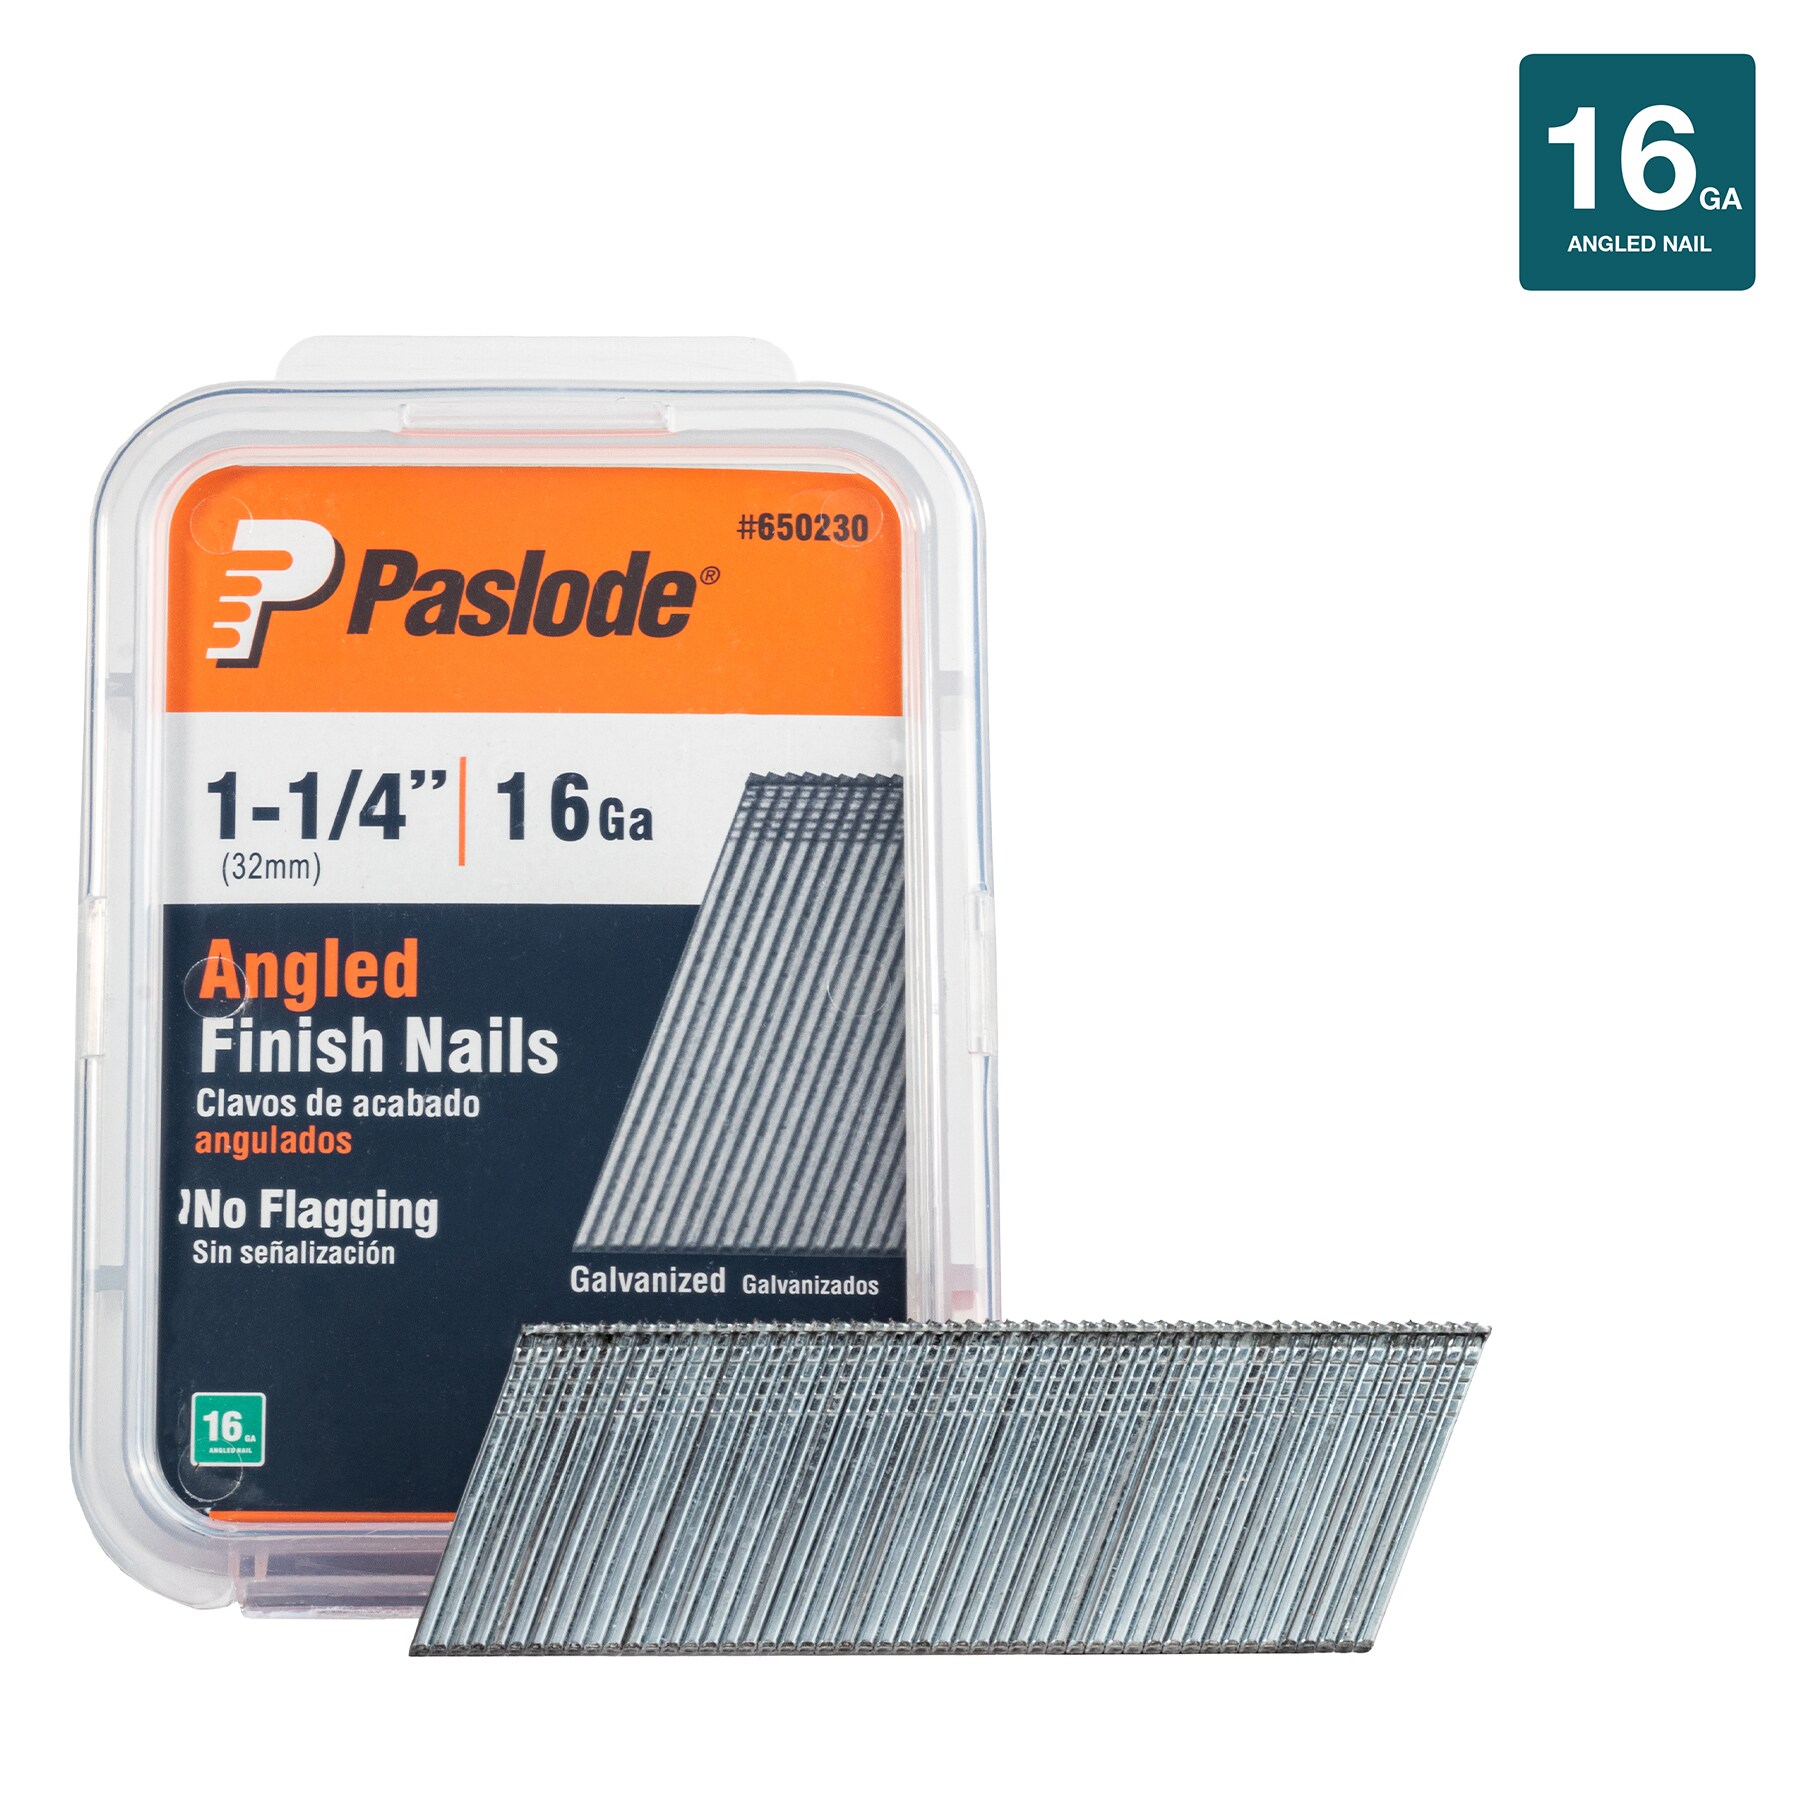 Lot of 8000 nails PASLODE 1 3/4 inch 16 gauge Galvanized Angled Finish Nail 16ga 